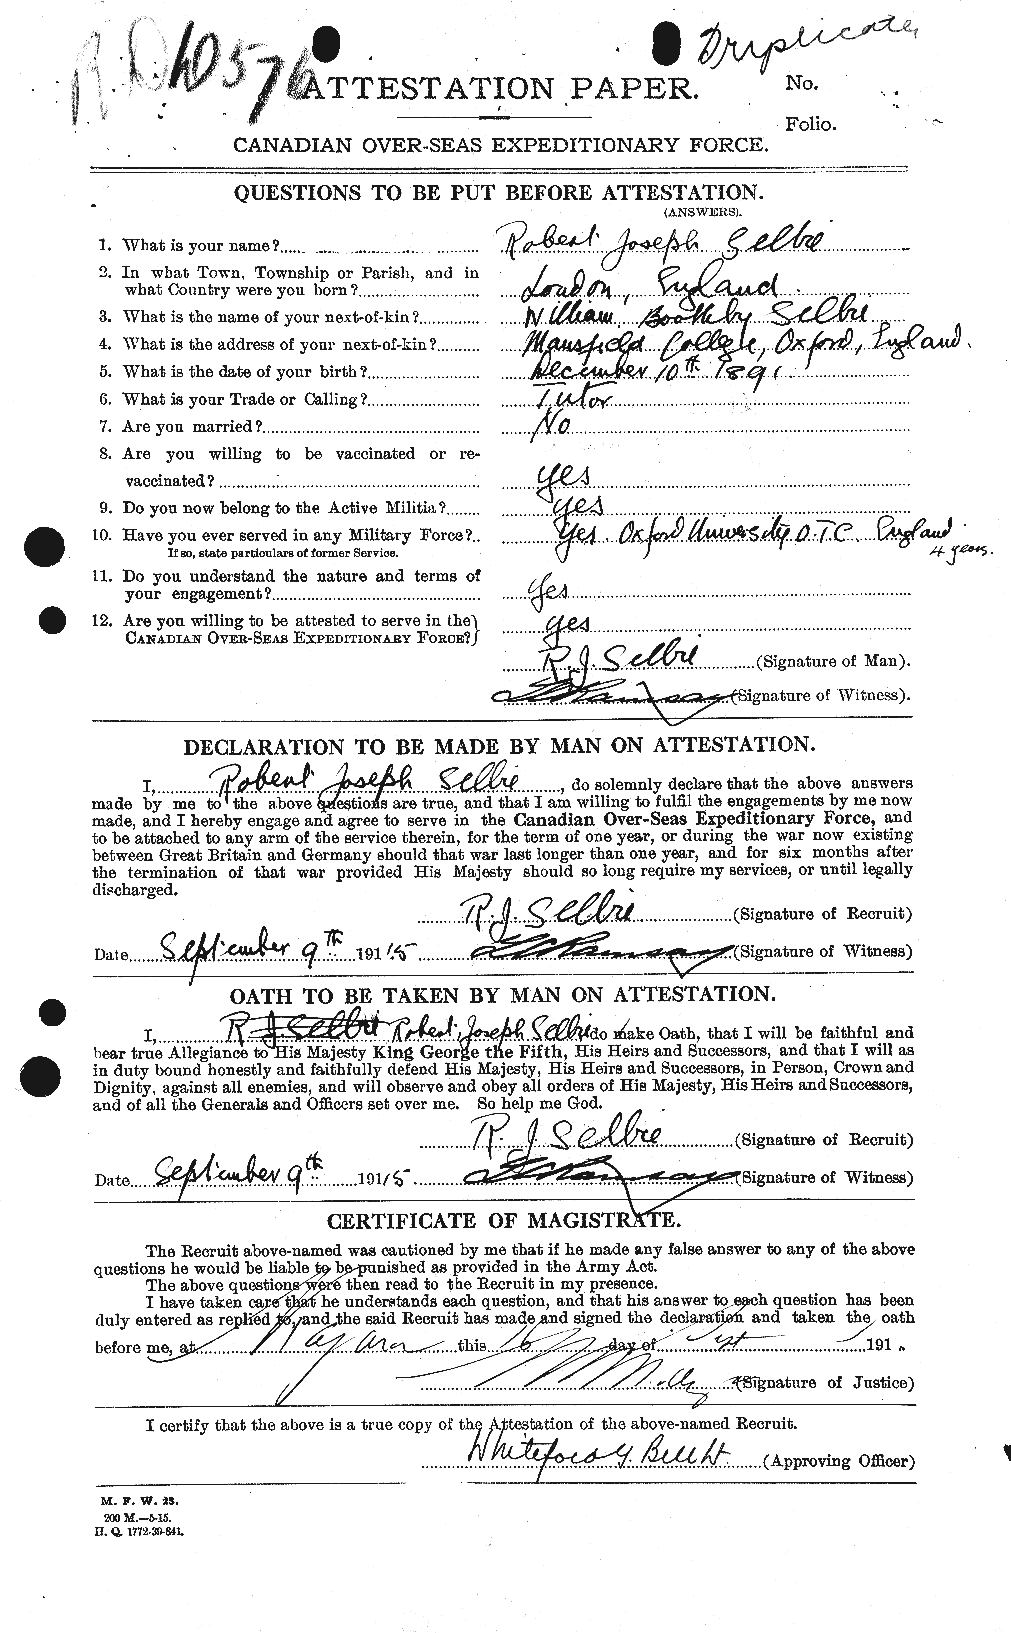 Personnel Records of the First World War - CEF 088771a